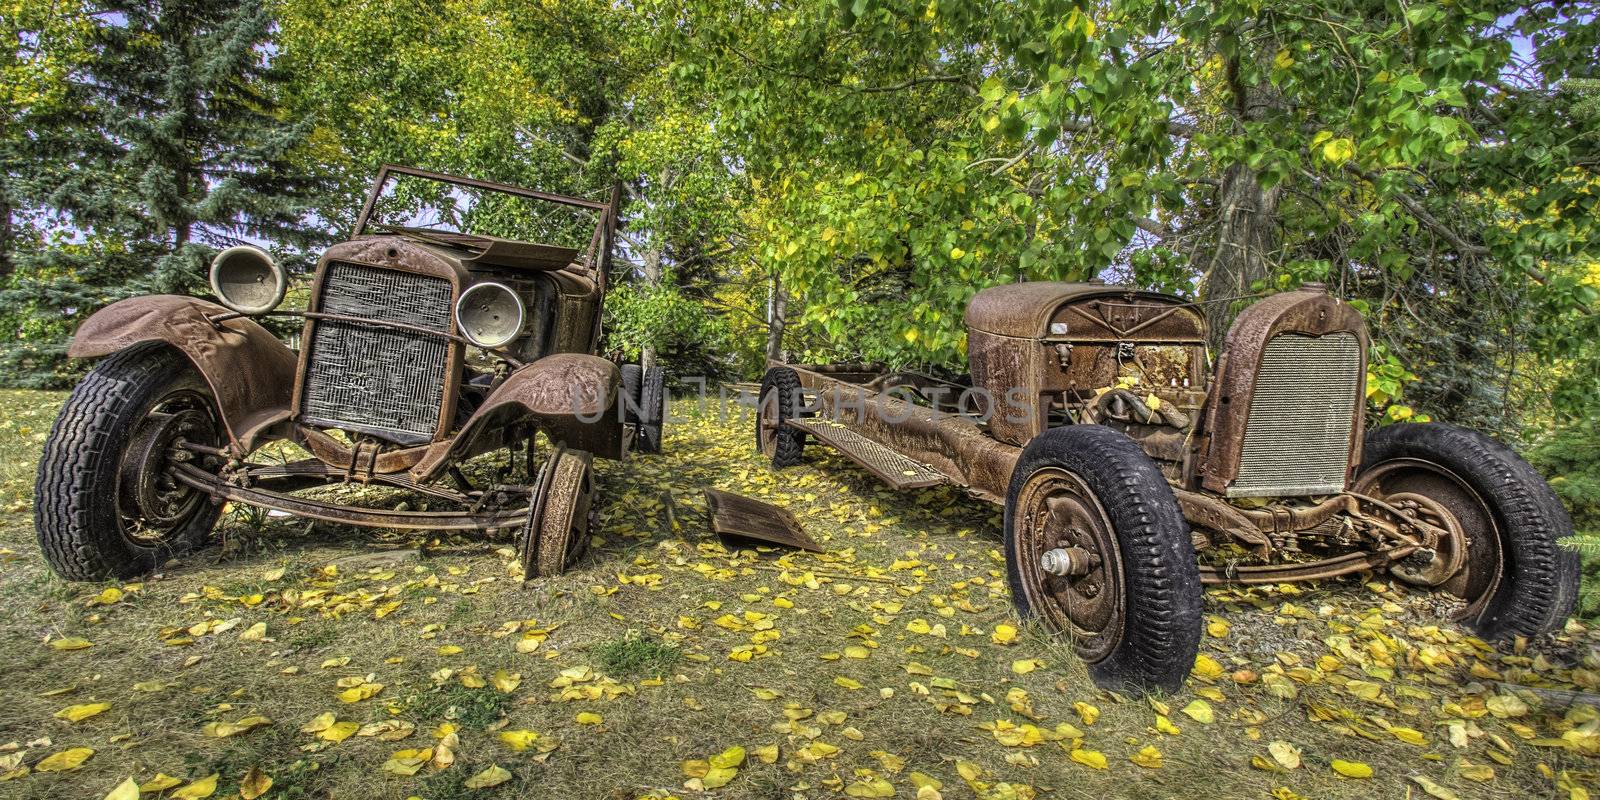 The remnants of two very old vehicles I discovered at Fort Edmonton in Edmonton, Alberta, Canada.